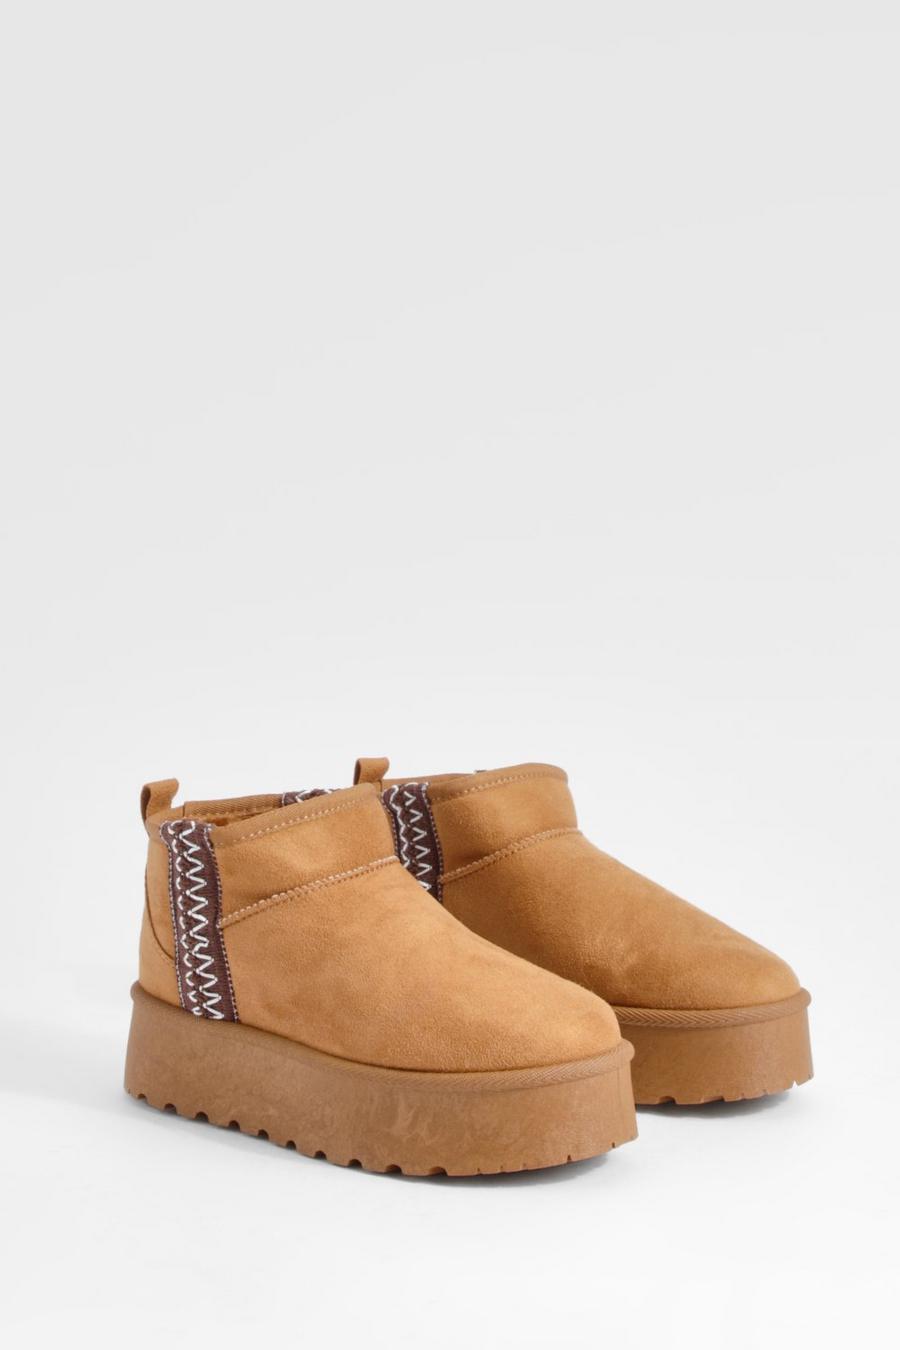 Chestnut Ultra Mini Embroidered Platform Cozy Boots